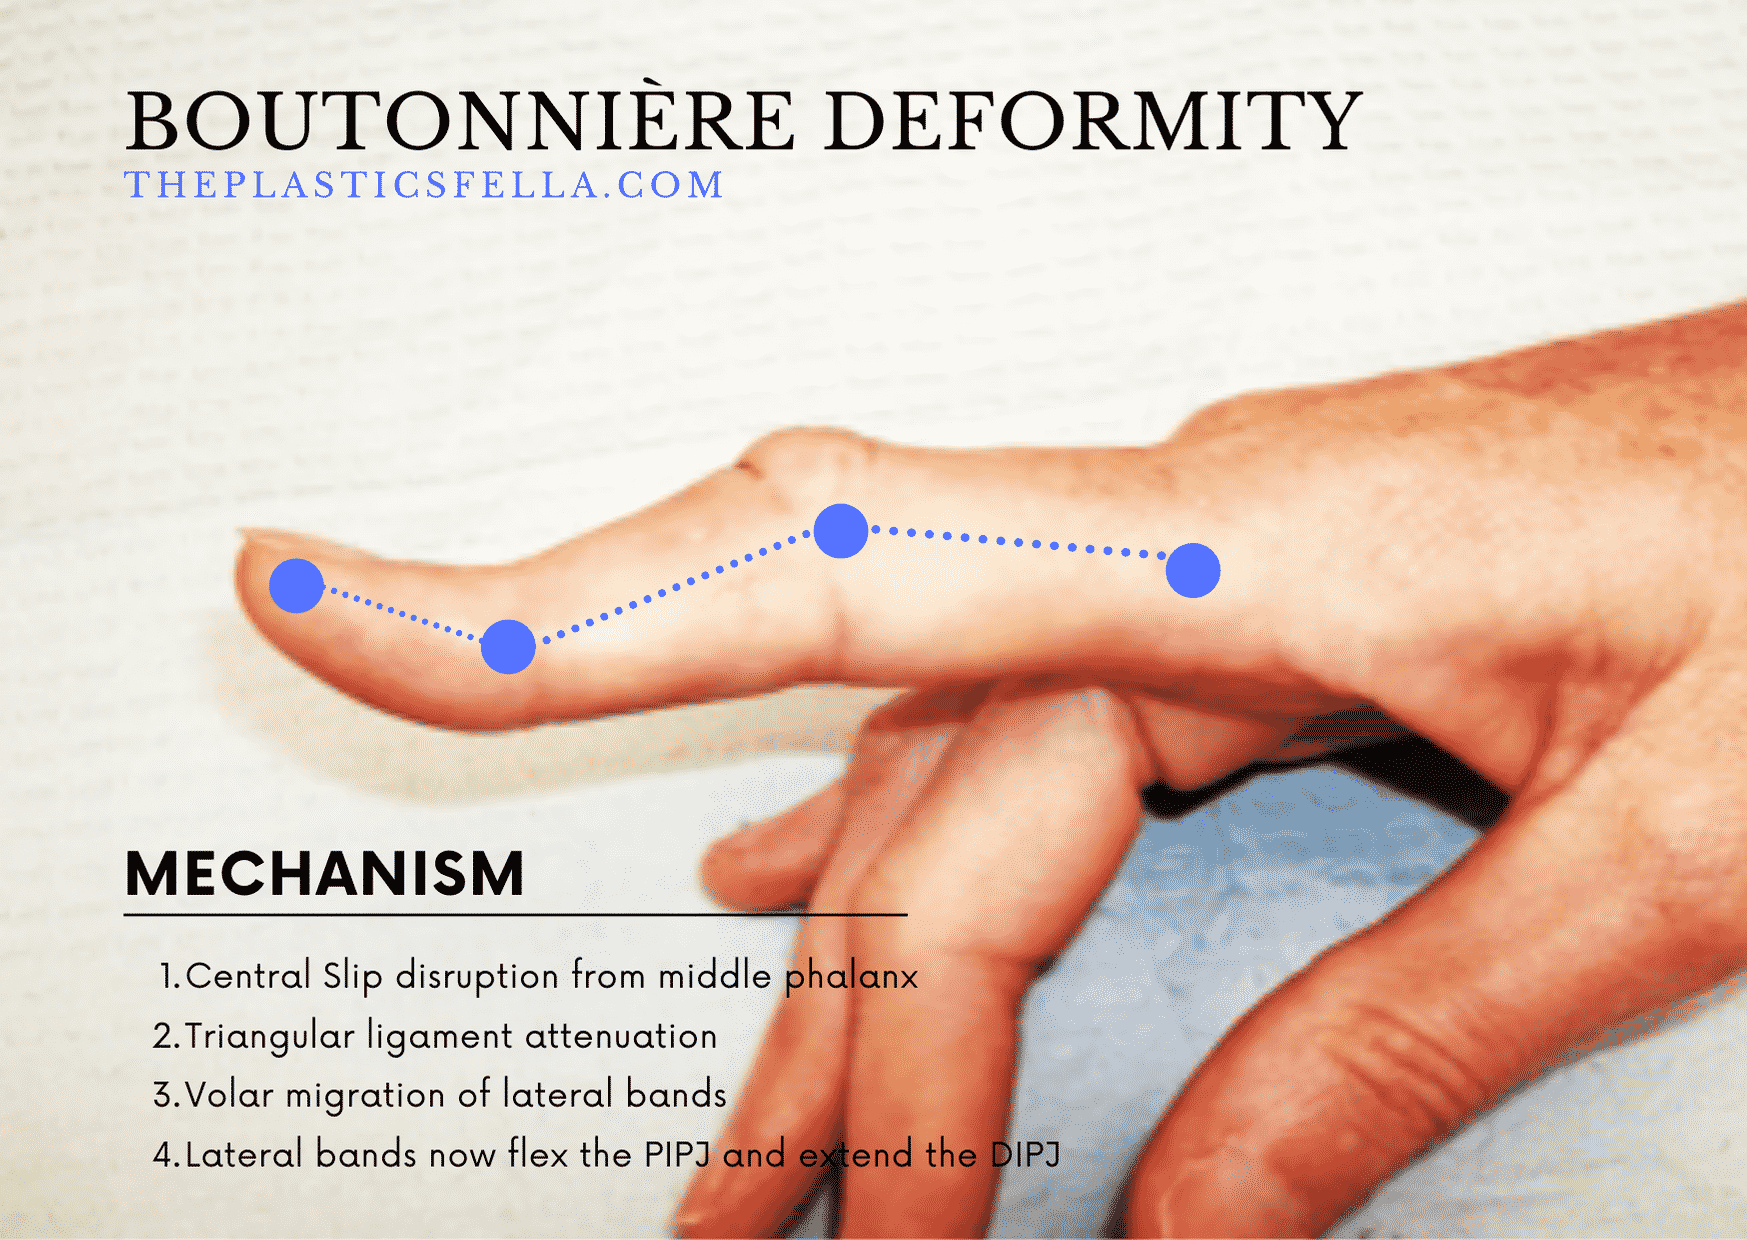 Signs and Biomechanics of a Boutonniere Deformity